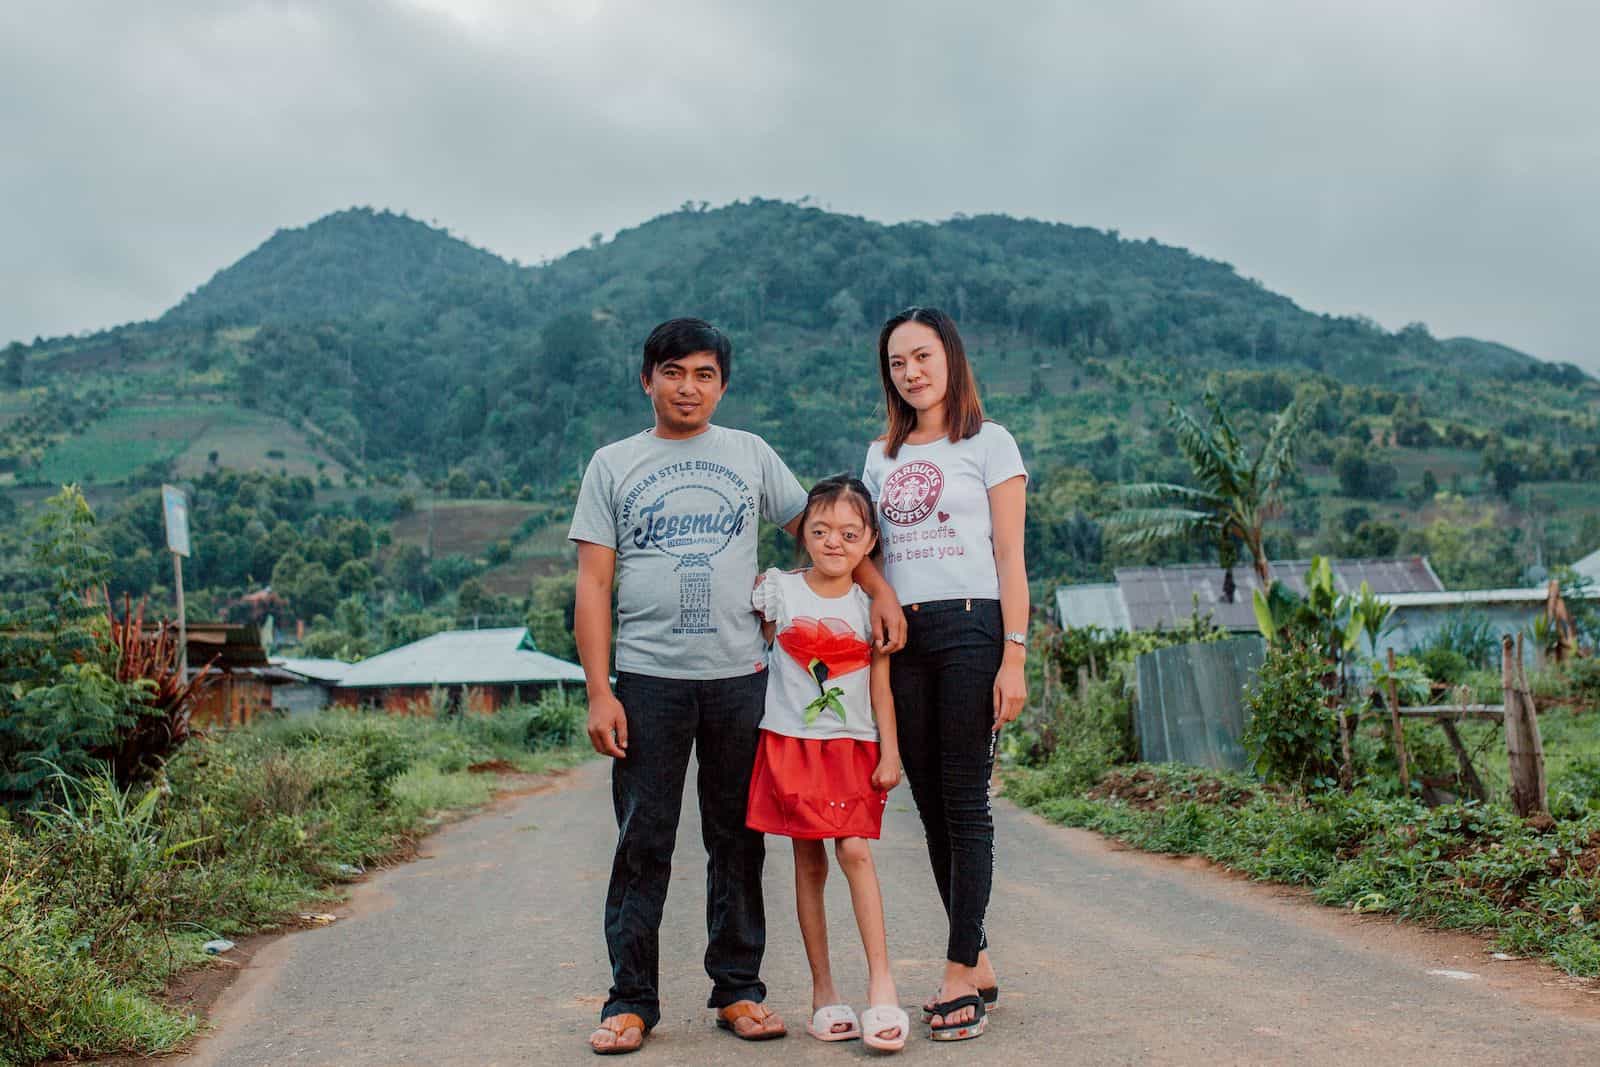 A photo of a girl with Apert Syndrome standing with two adults on a road in front of a mountain.